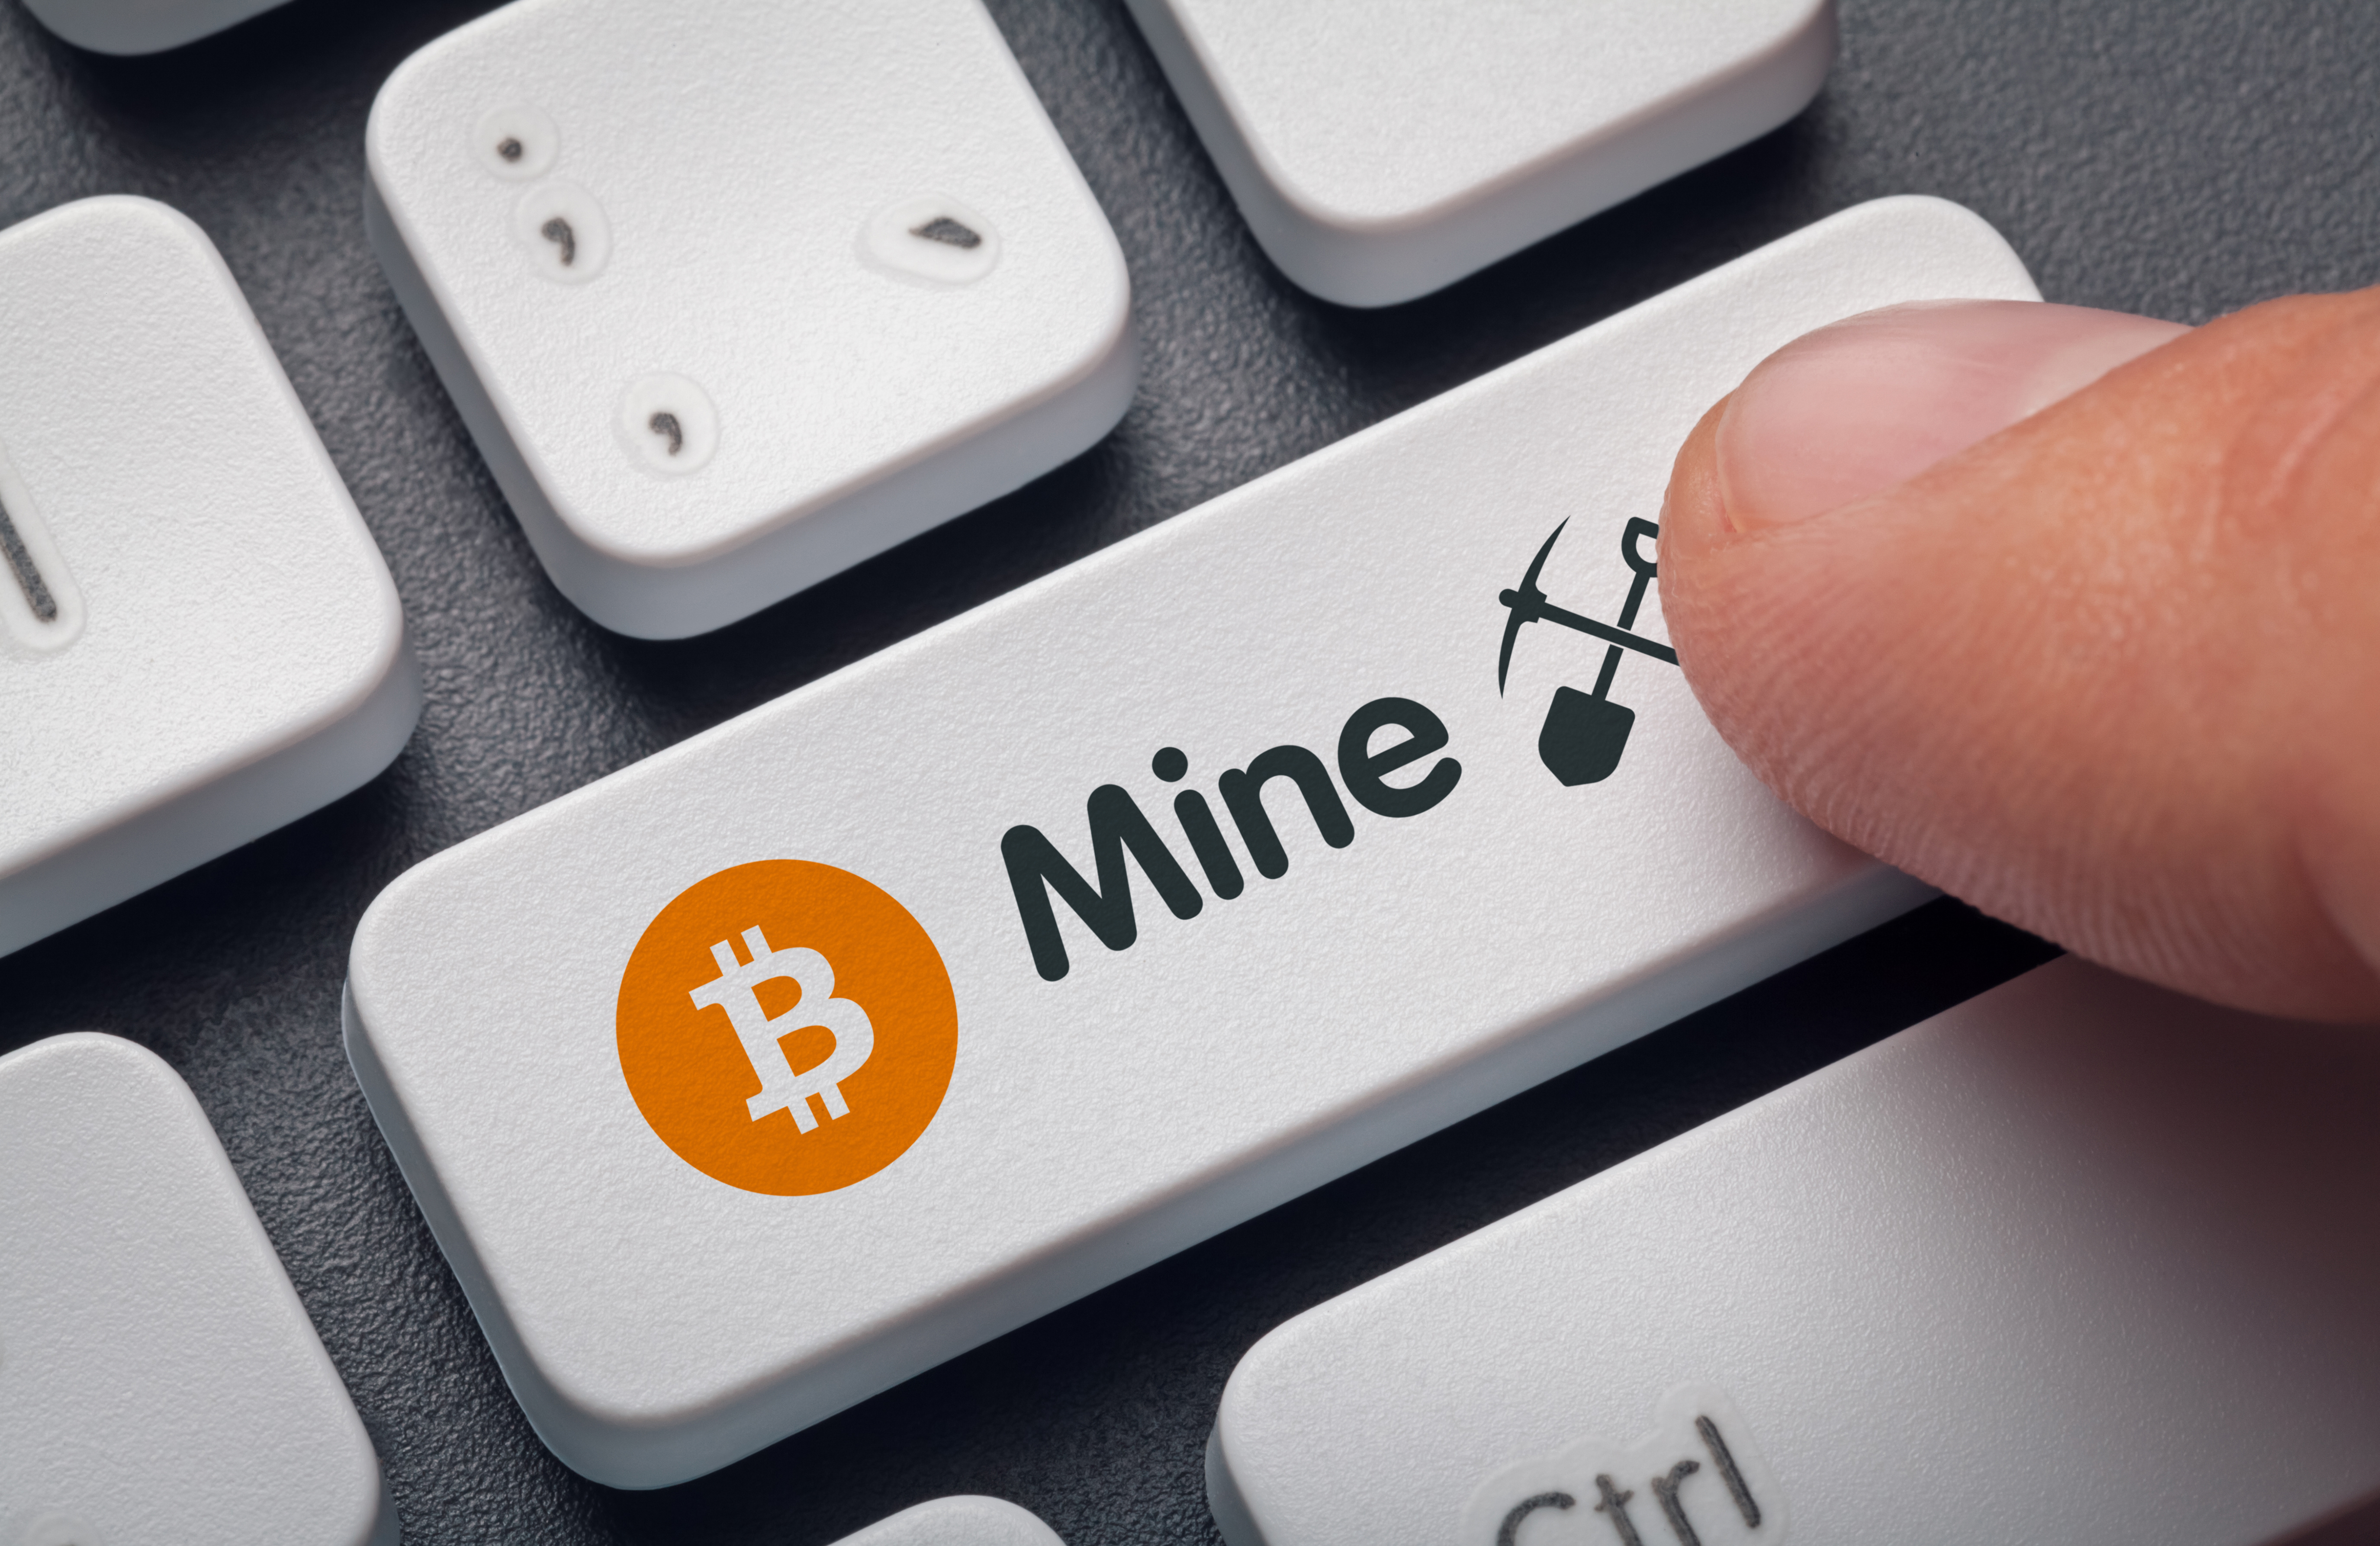 A person&amp;amp;rsquo;s finger presses a computer keyboard key. The key is decorated with a symbol that represents Bitcoin, as well as the word &amp;amp;ldquo;mine&amp;amp;rdquo; and drawings of a pick and shovel.